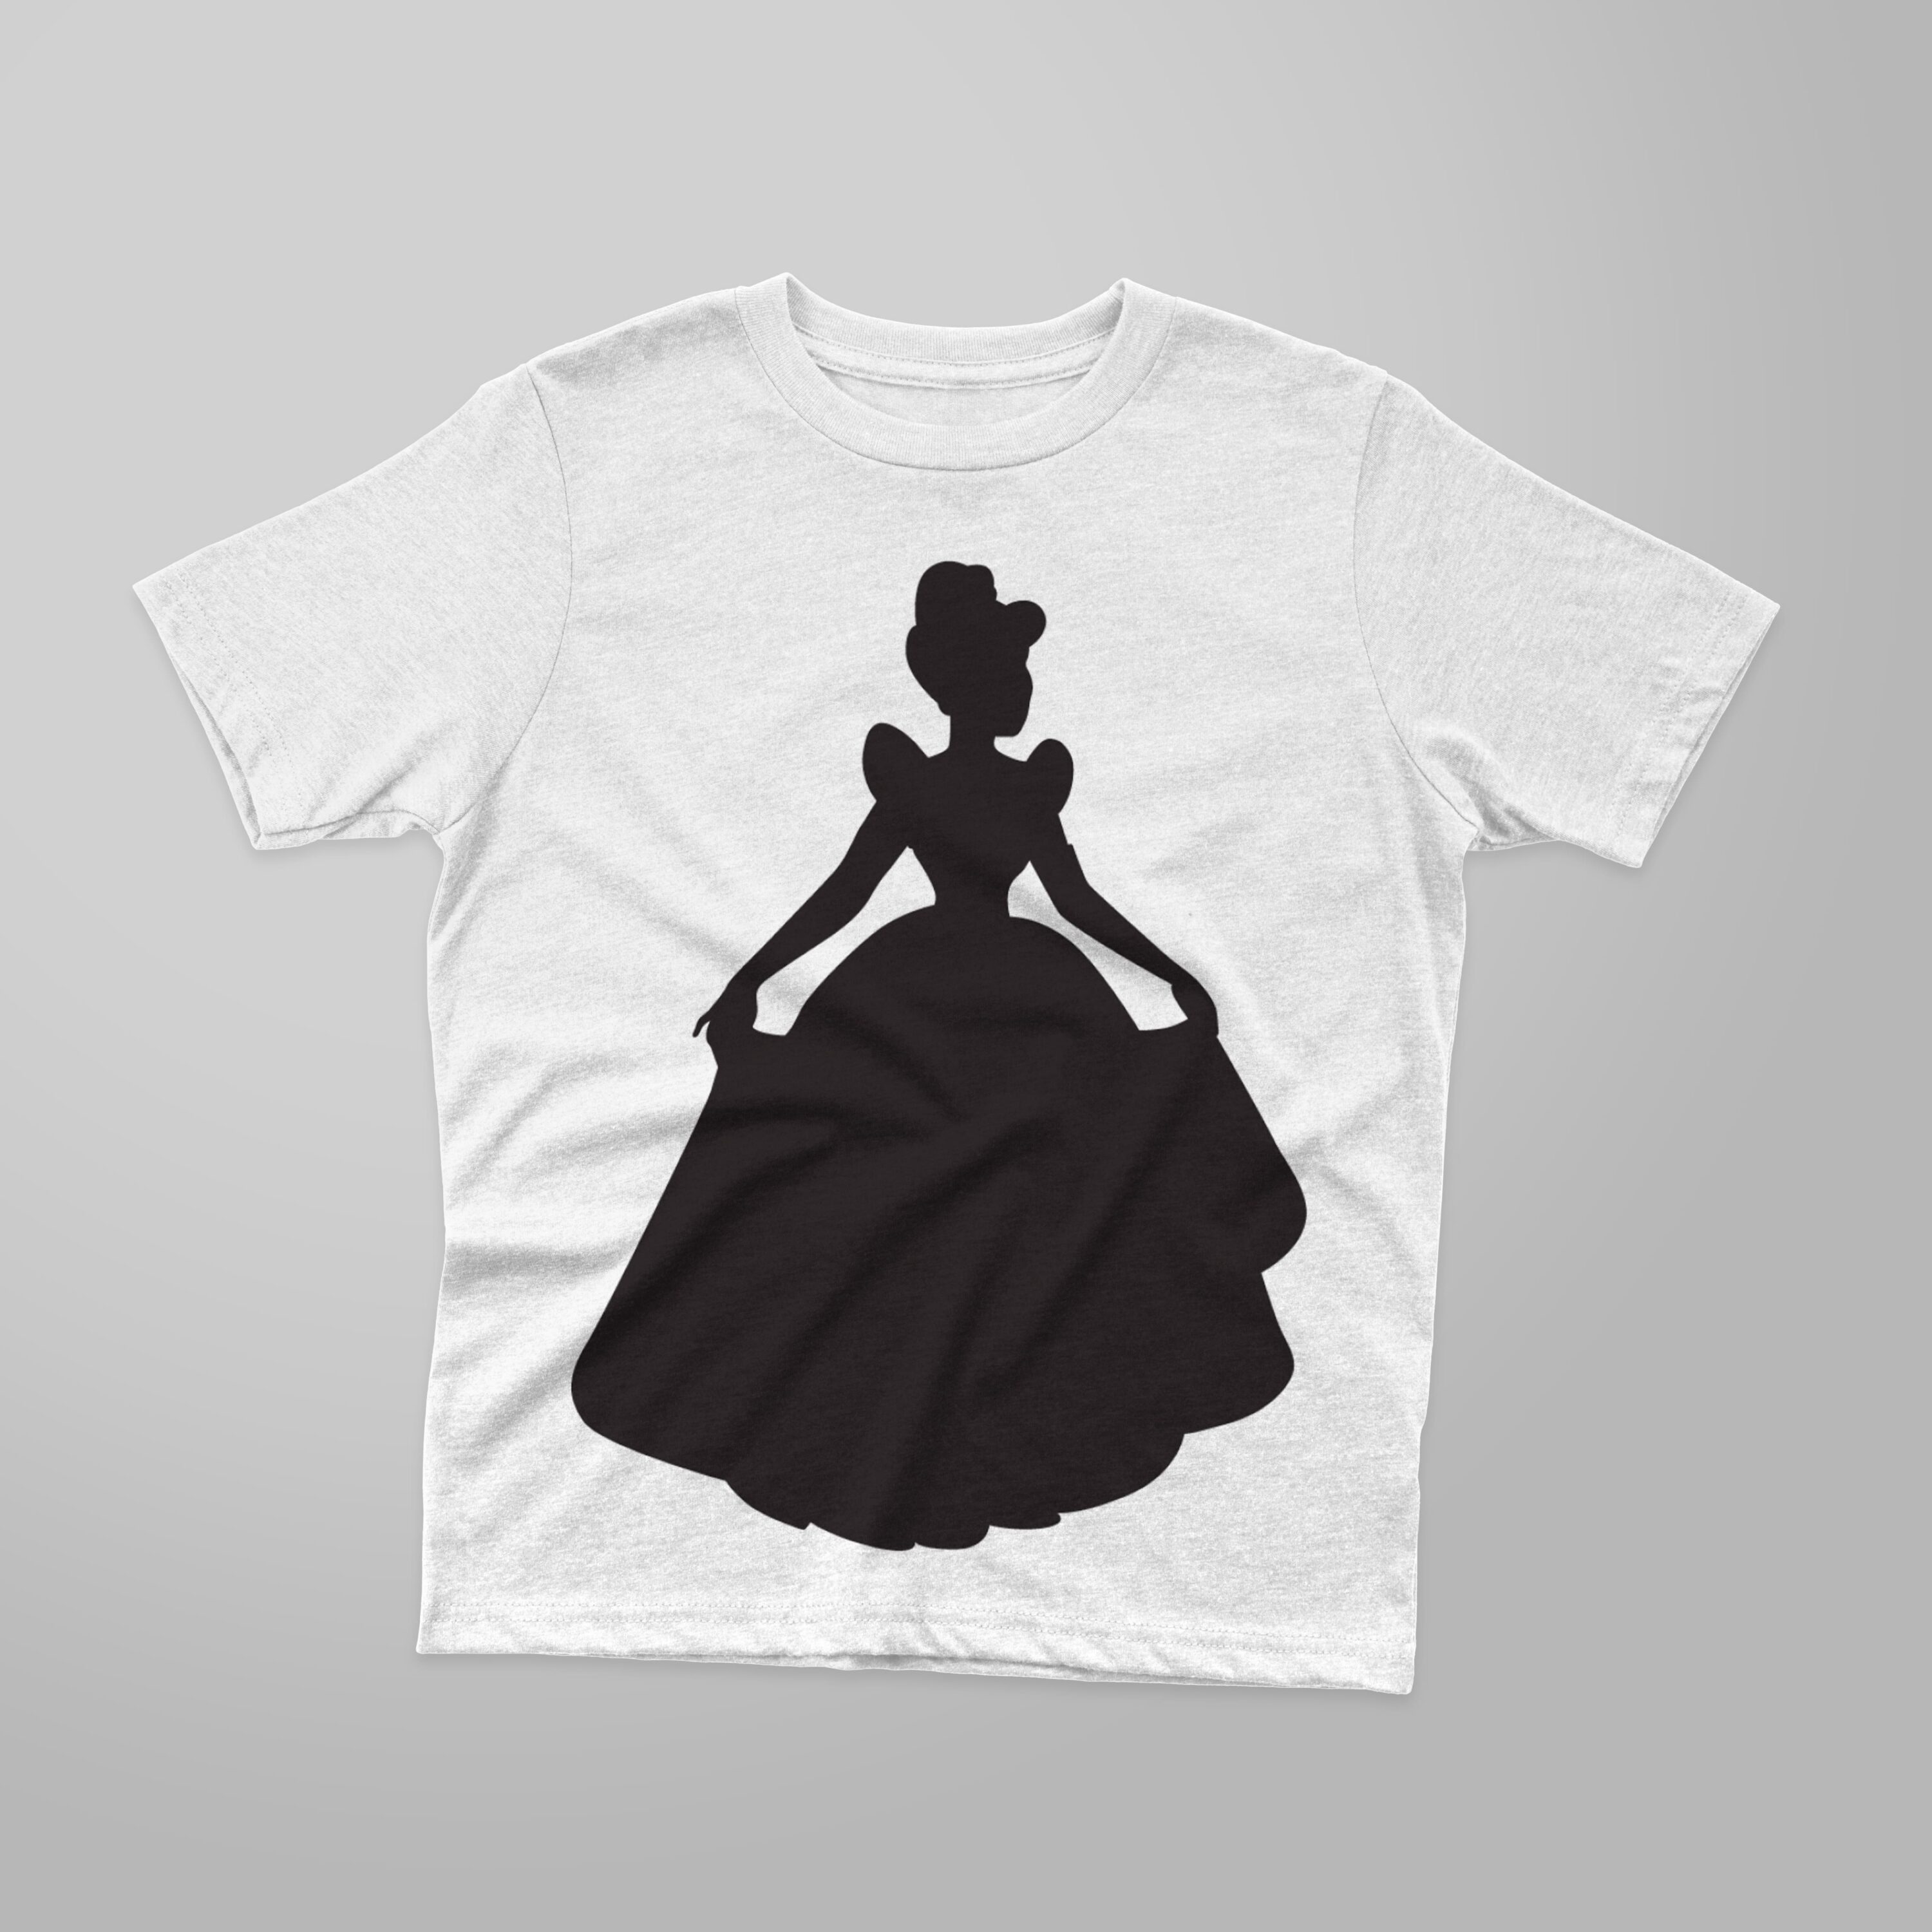 Image of a white t-shirt with a great Cinderella silhouette print.